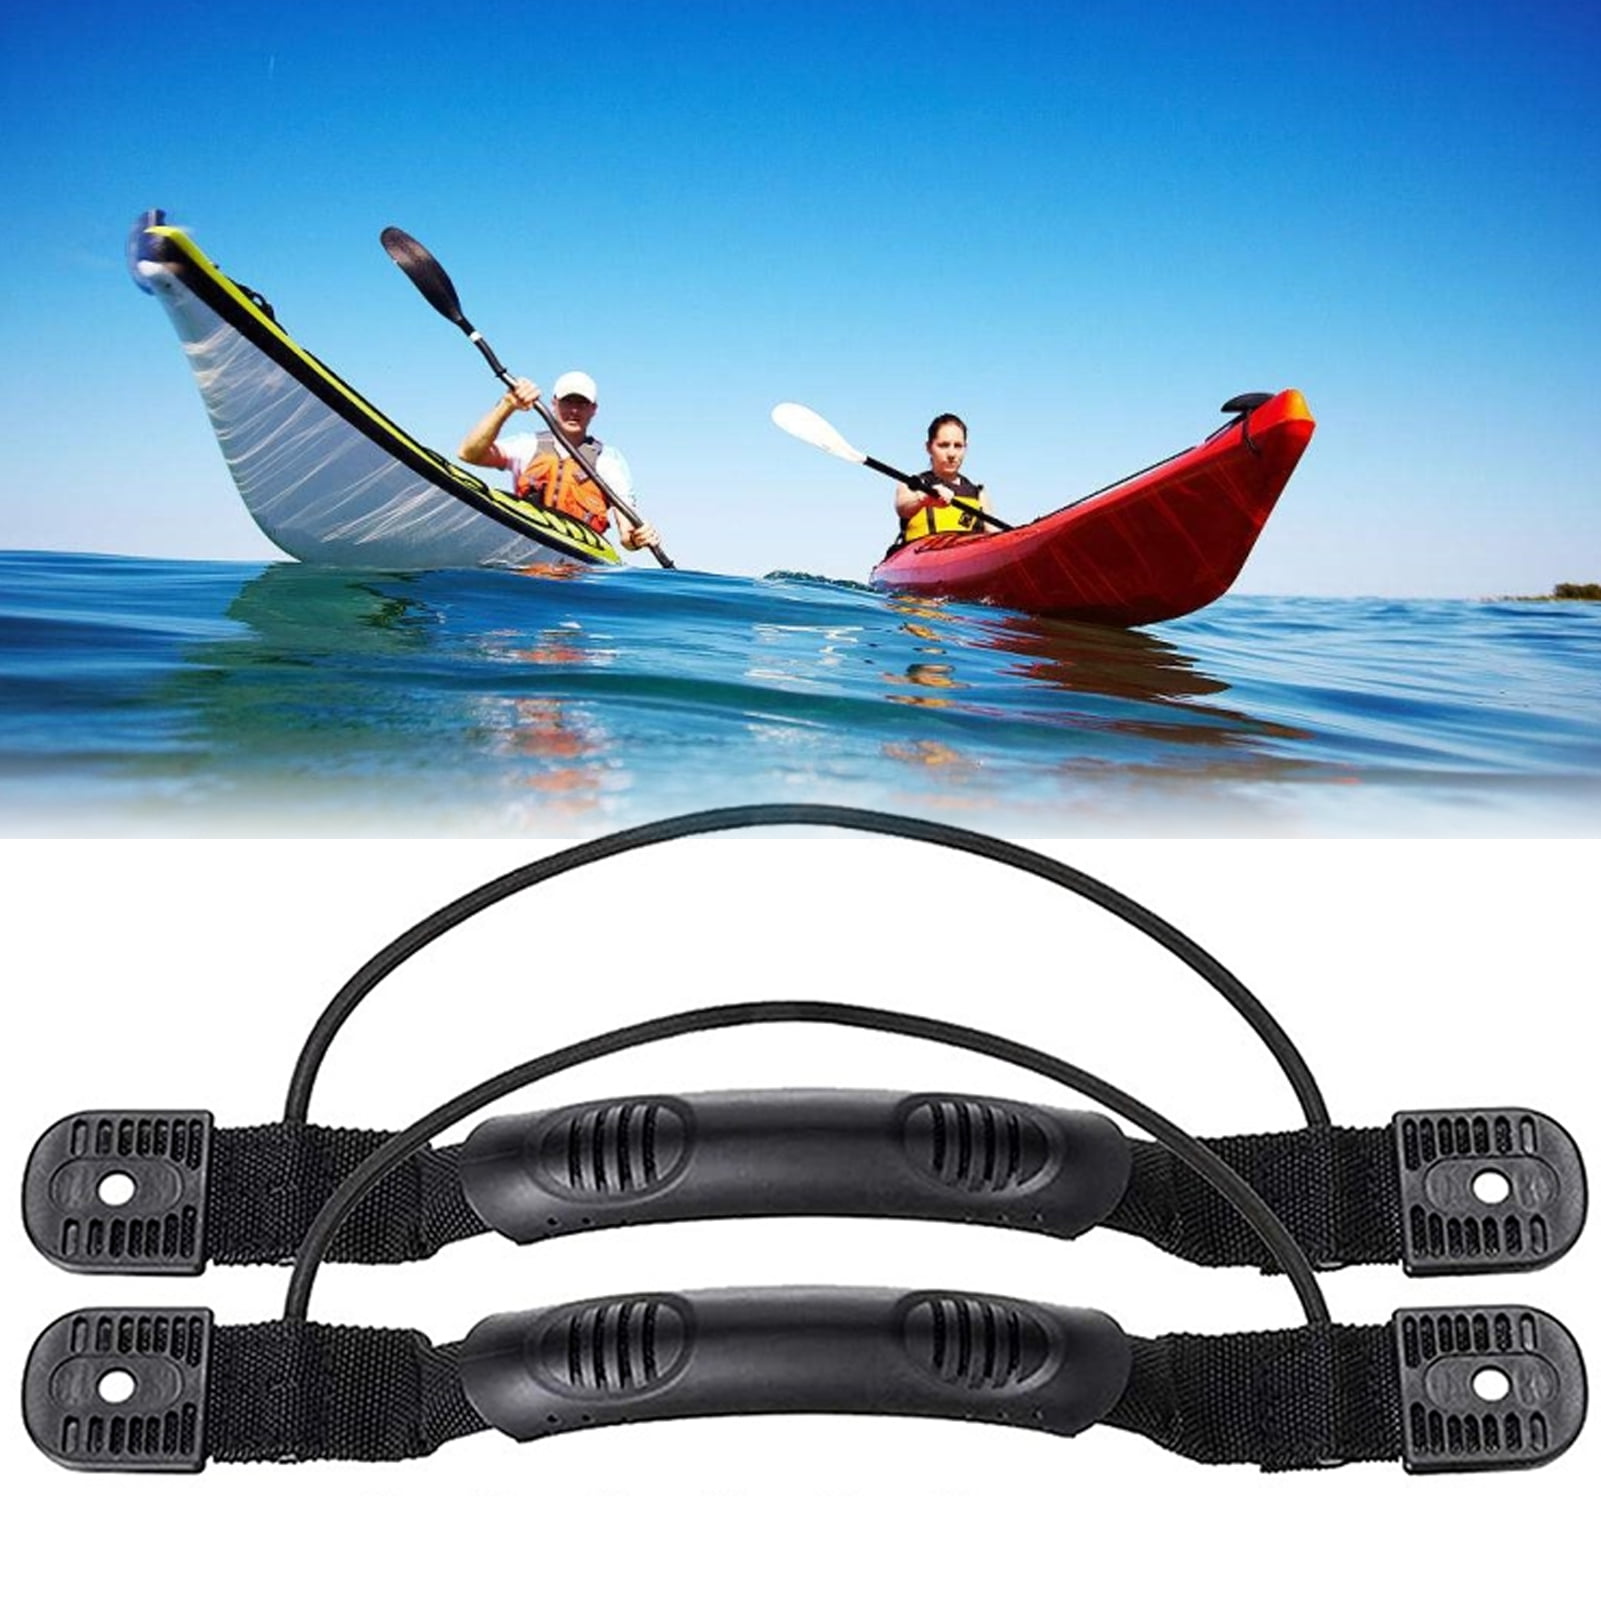 4-pack Rubber Boat Luggage Side Mount Carry Handles Fitting for Kayak Canoe Boat 